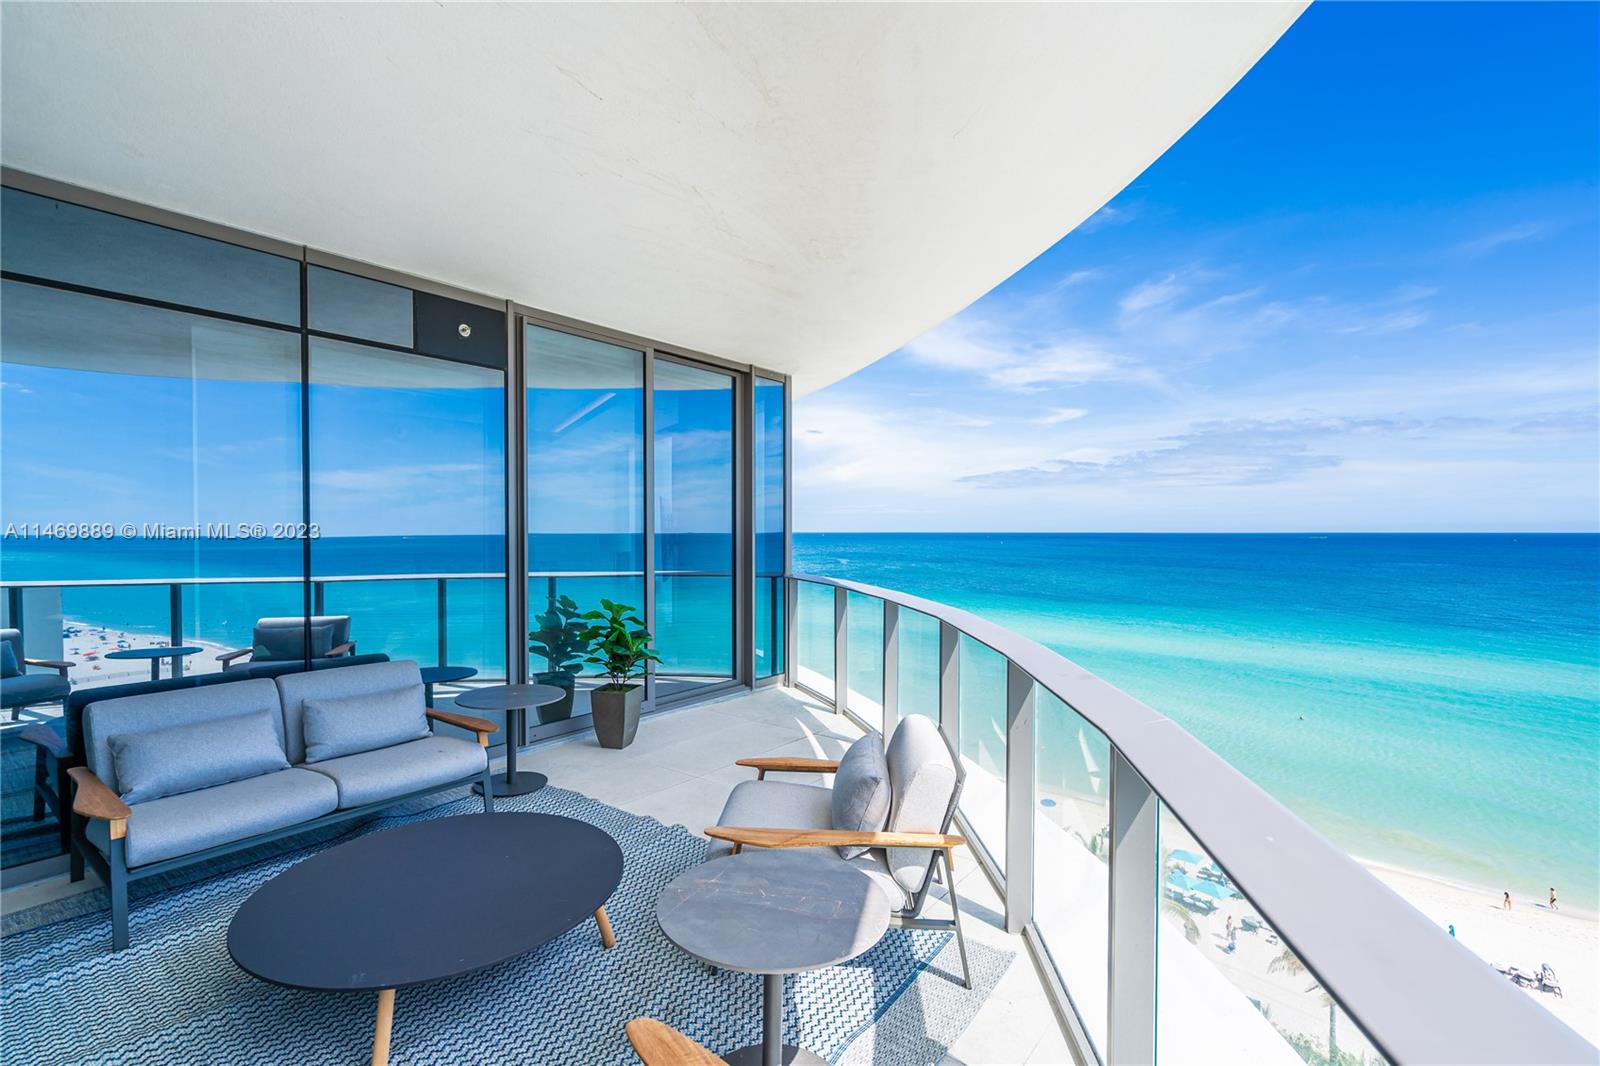 AMAZING oceanfront 4 beds + den / 5.5 baths unit at The Ritz Carlton Sunny Isles!!  It boasts the largest layout in the whole building, and let me tell you, the views are absolutely breathtaking!  From all the balconies and floor to ceiling glass windows throughout the unit, you get to enjoy beautiful panoramic views of the ocean, bay, and skyline!  This unit comes with a private elevator for added convenience. The kitchen is a dream come true, featuring Snaidero cabinets and top-of-the-line Gaggenau appliances.  The entire unit has been professionally designed and furnished with no expense spared! 

If you're looking for a true piece of heaven by the ocean, this is it!